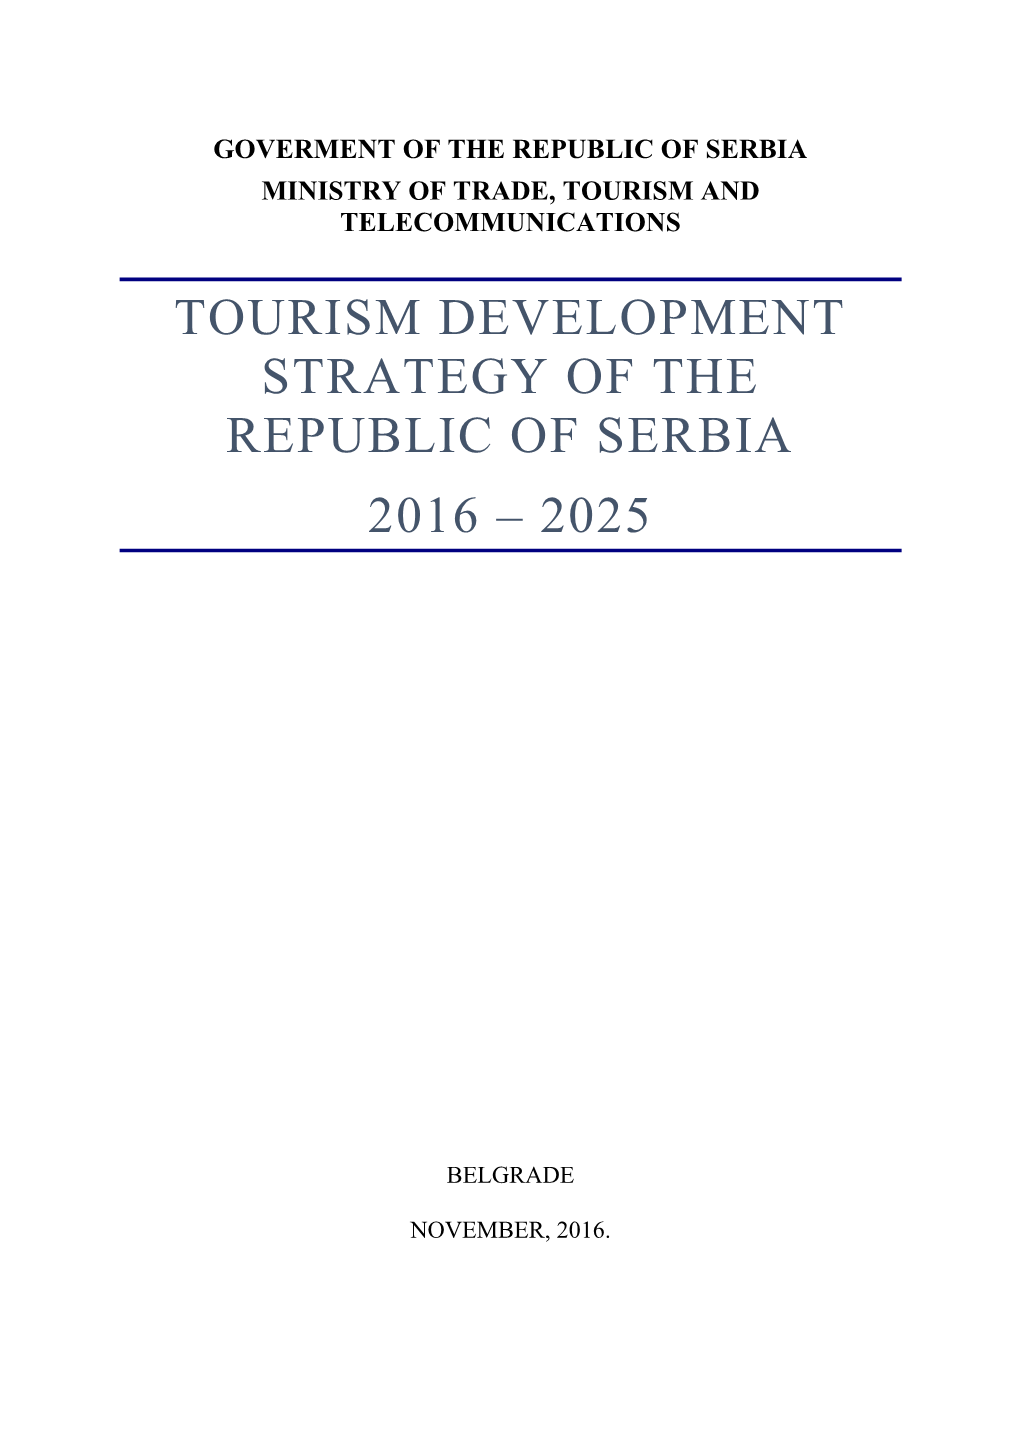 Tourism Development Strategy of the Republic of Serbia 2016 – 2025